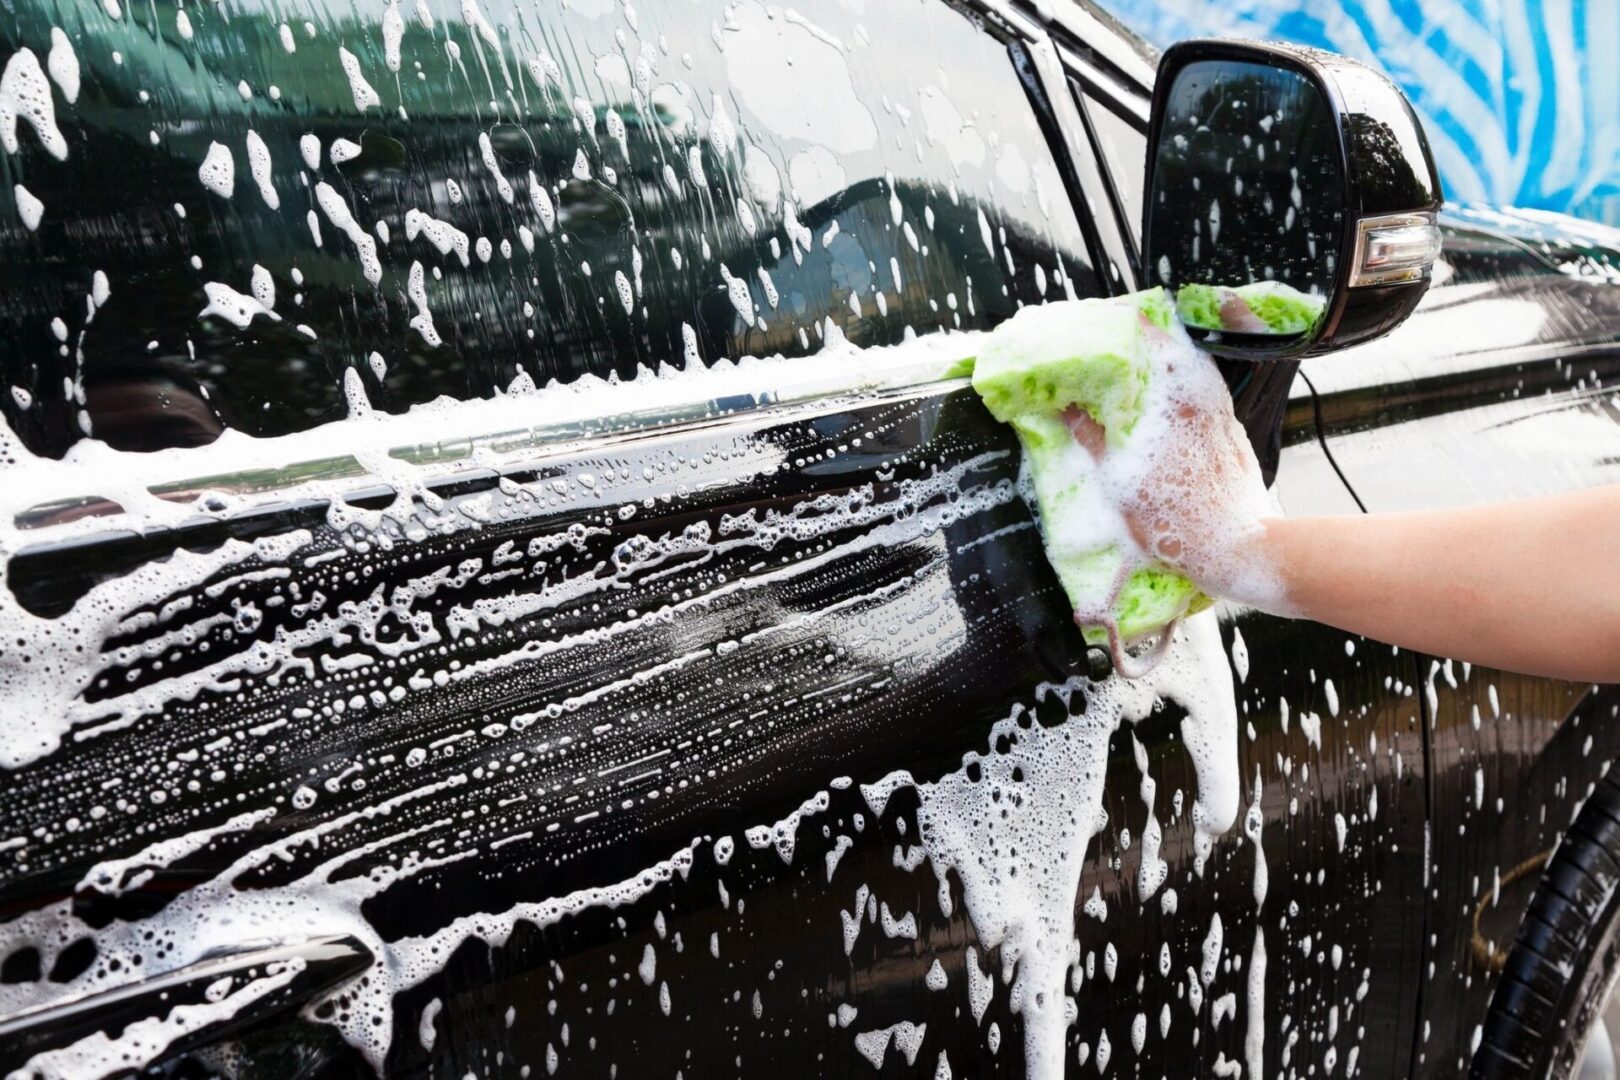 A person washing their car with soap and water.